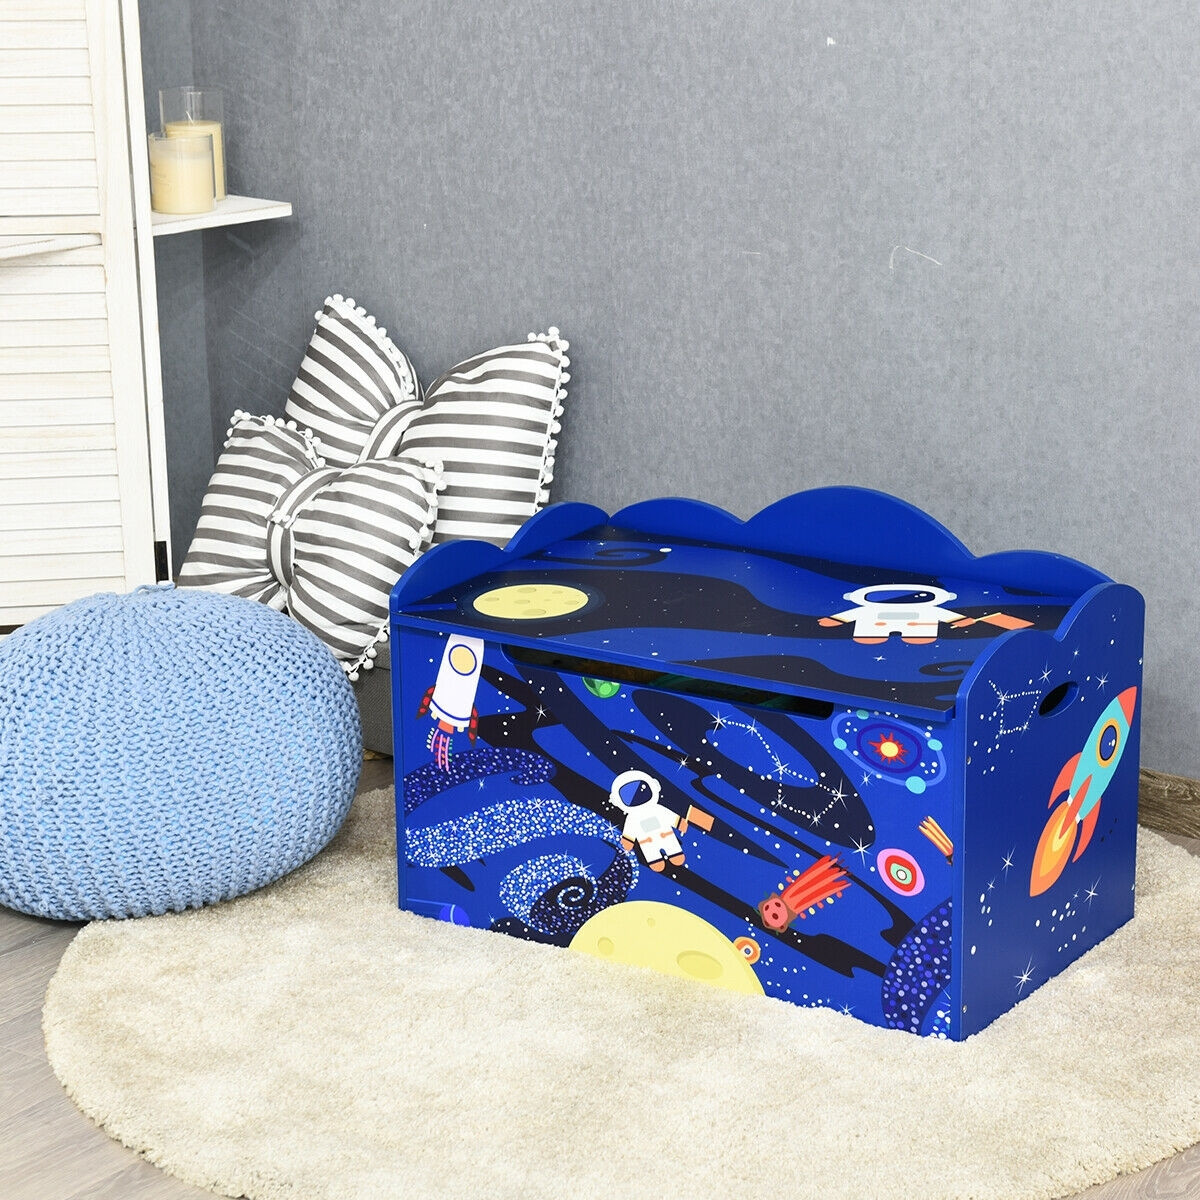 Wooden Toy Box Storage With Seating Bench For Kids